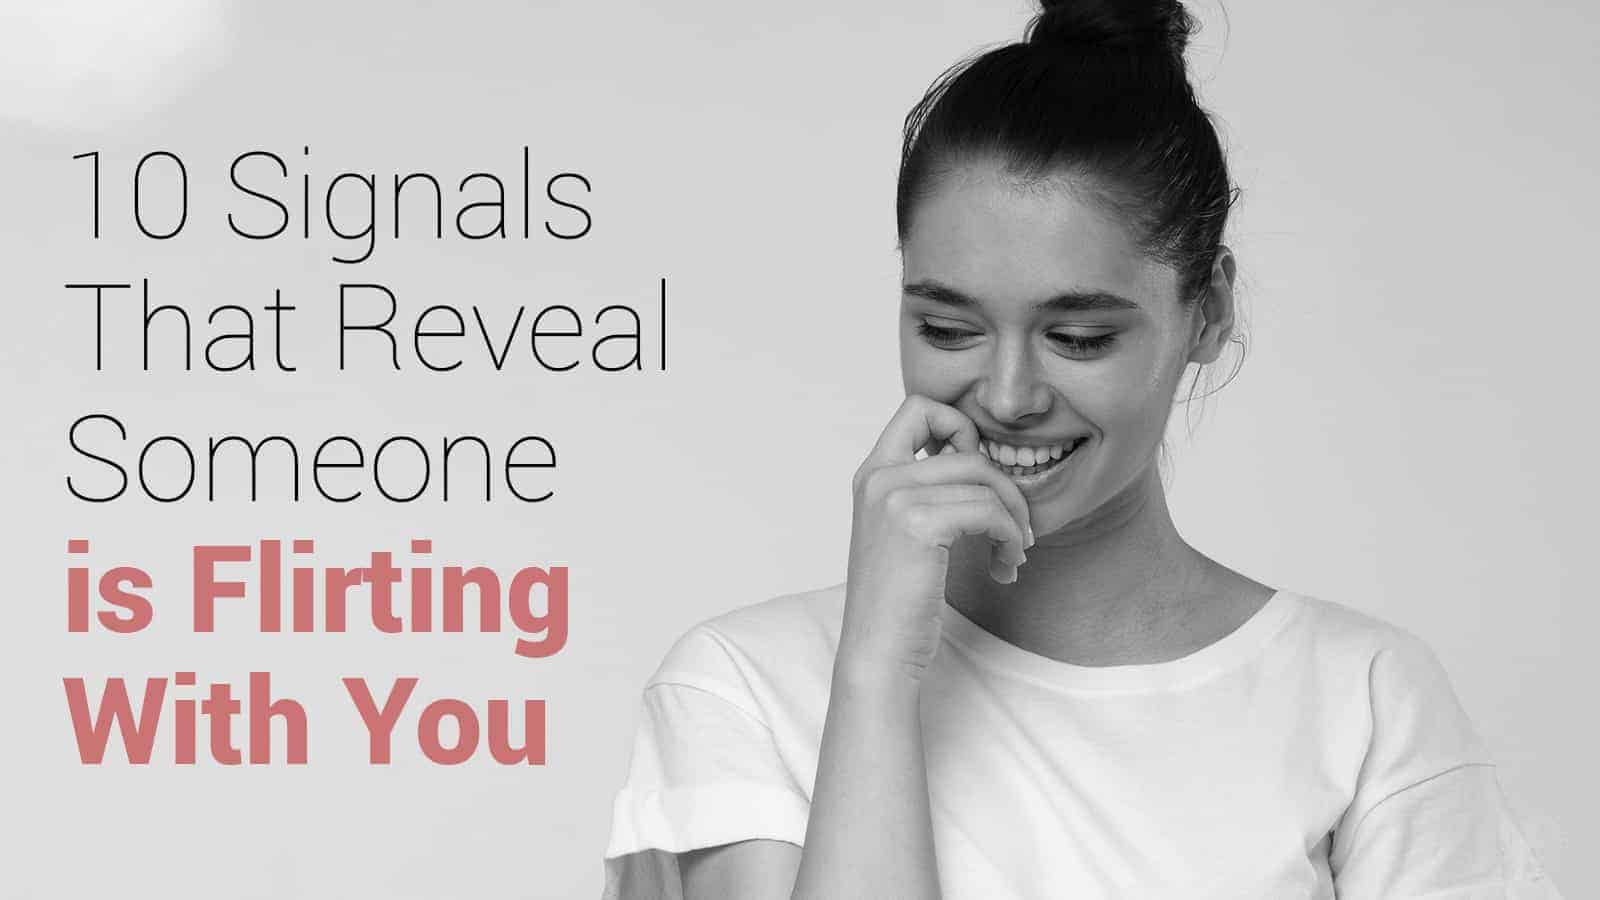 10 Signals That Reveal Someone is Flirting With You